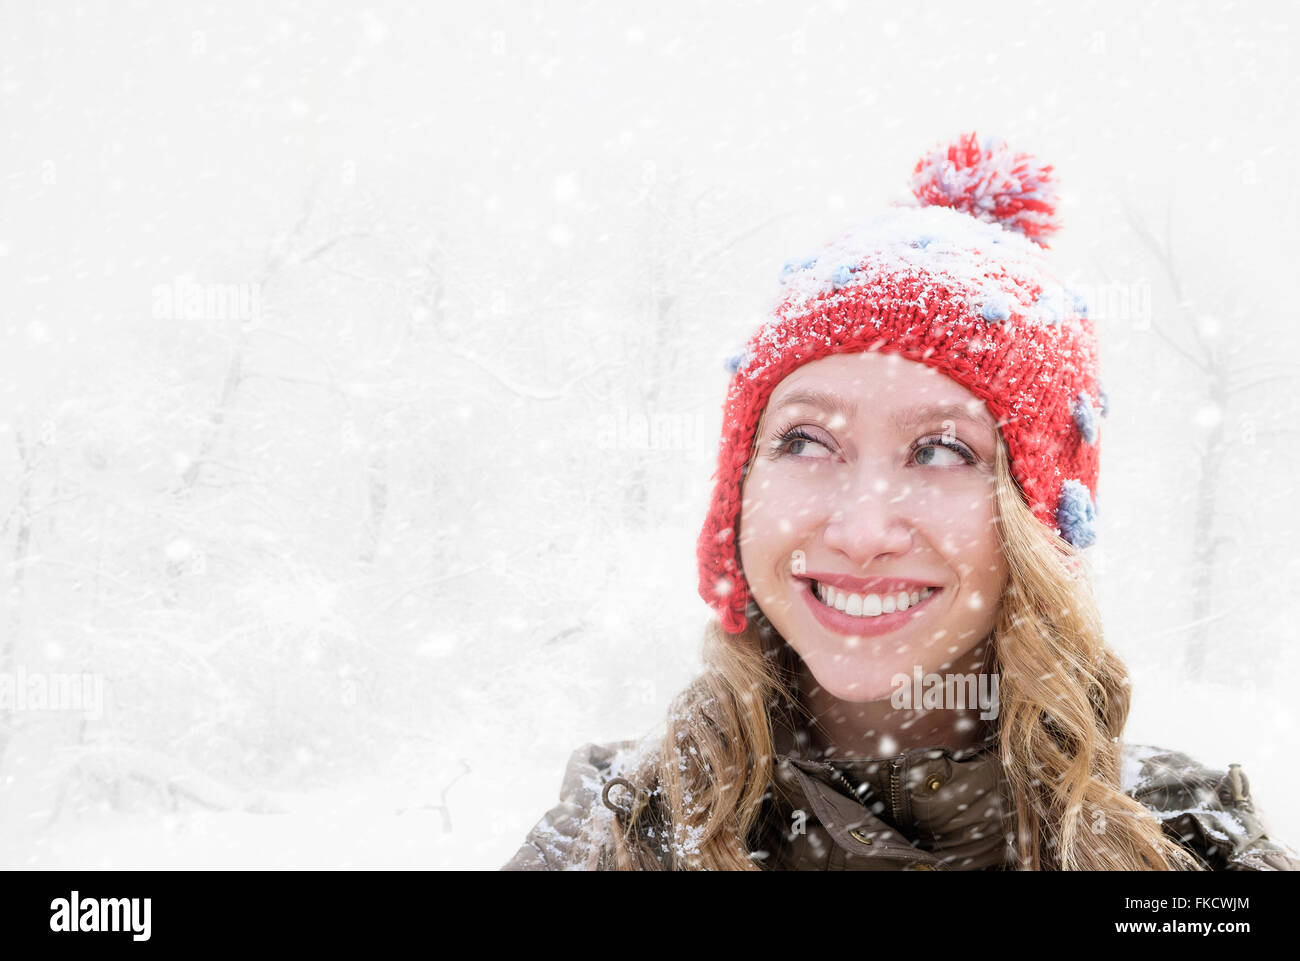 Woman in red Knit hat looking away Banque D'Images